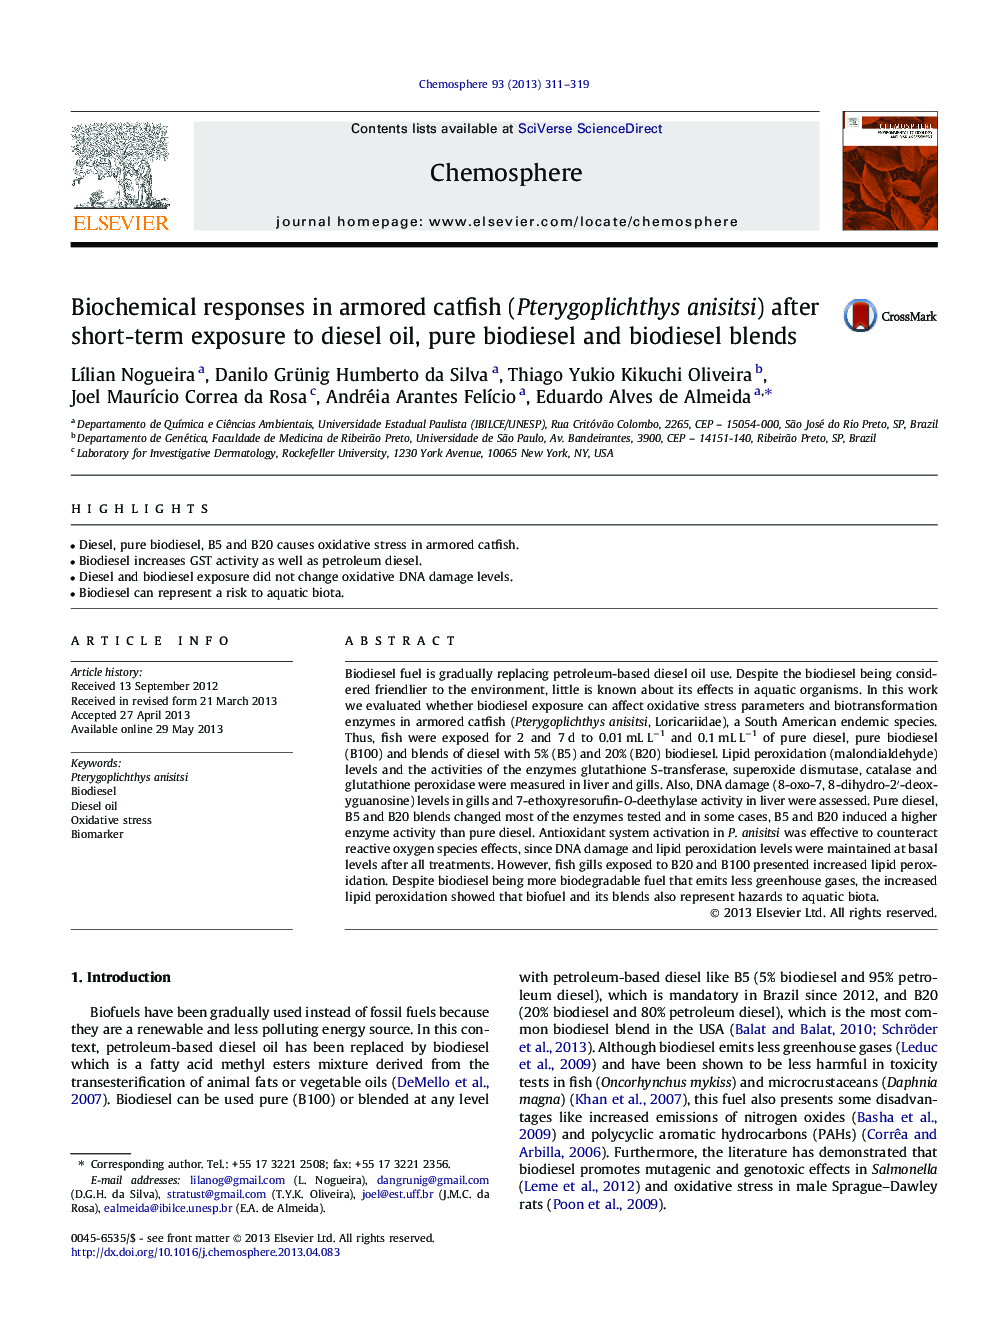 Biochemical responses in armored catfish (Pterygoplichthys anisitsi) after short-term exposure to diesel oil, pure biodiesel and biodiesel blends